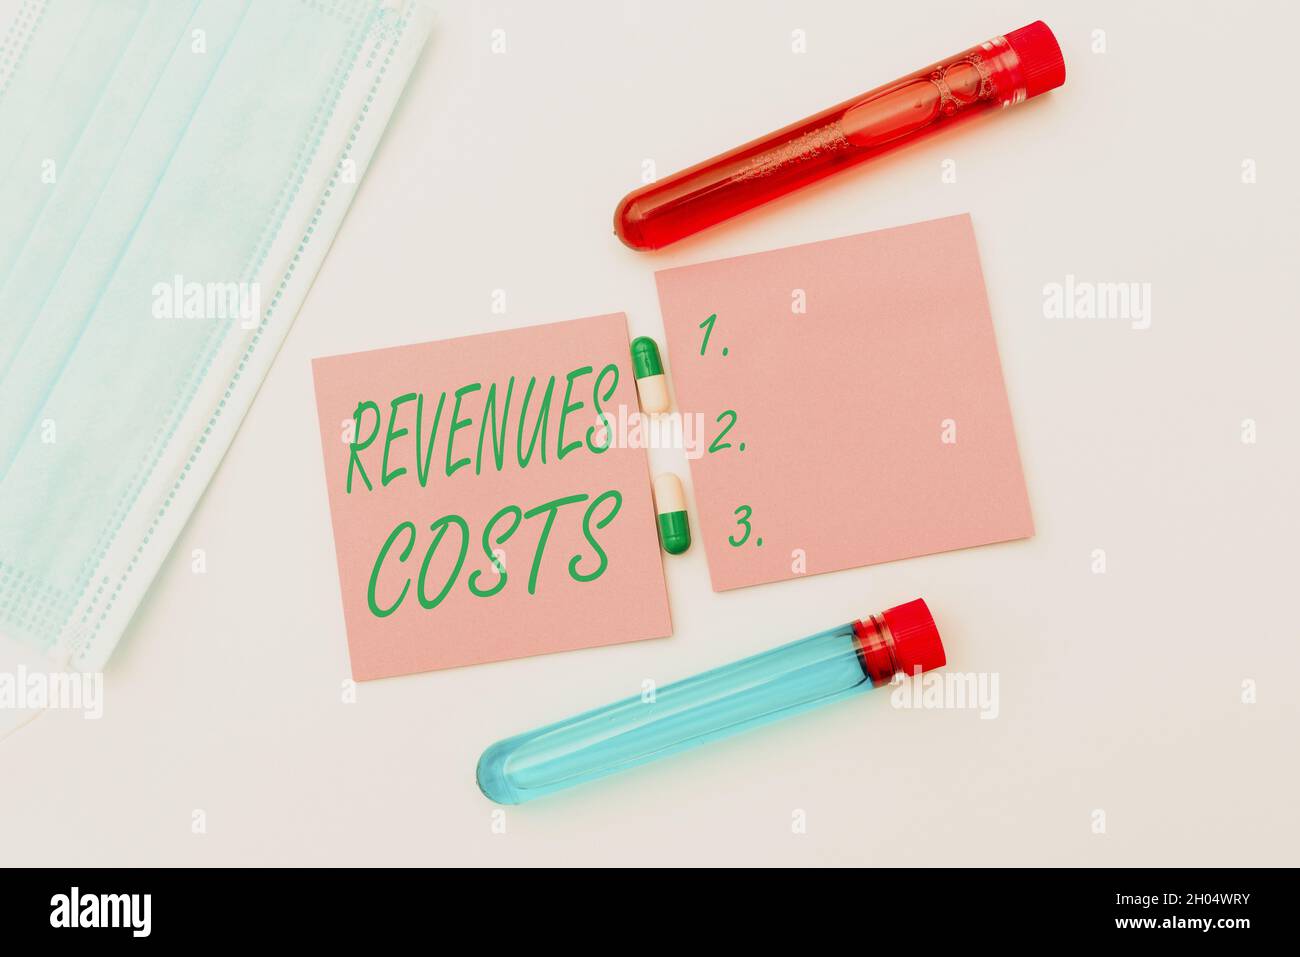 Writing displaying text Revenues Costs. Business overview Total amount of money in Manufacturing and Delivery a product Spreading Virus Awareness Stock Photo